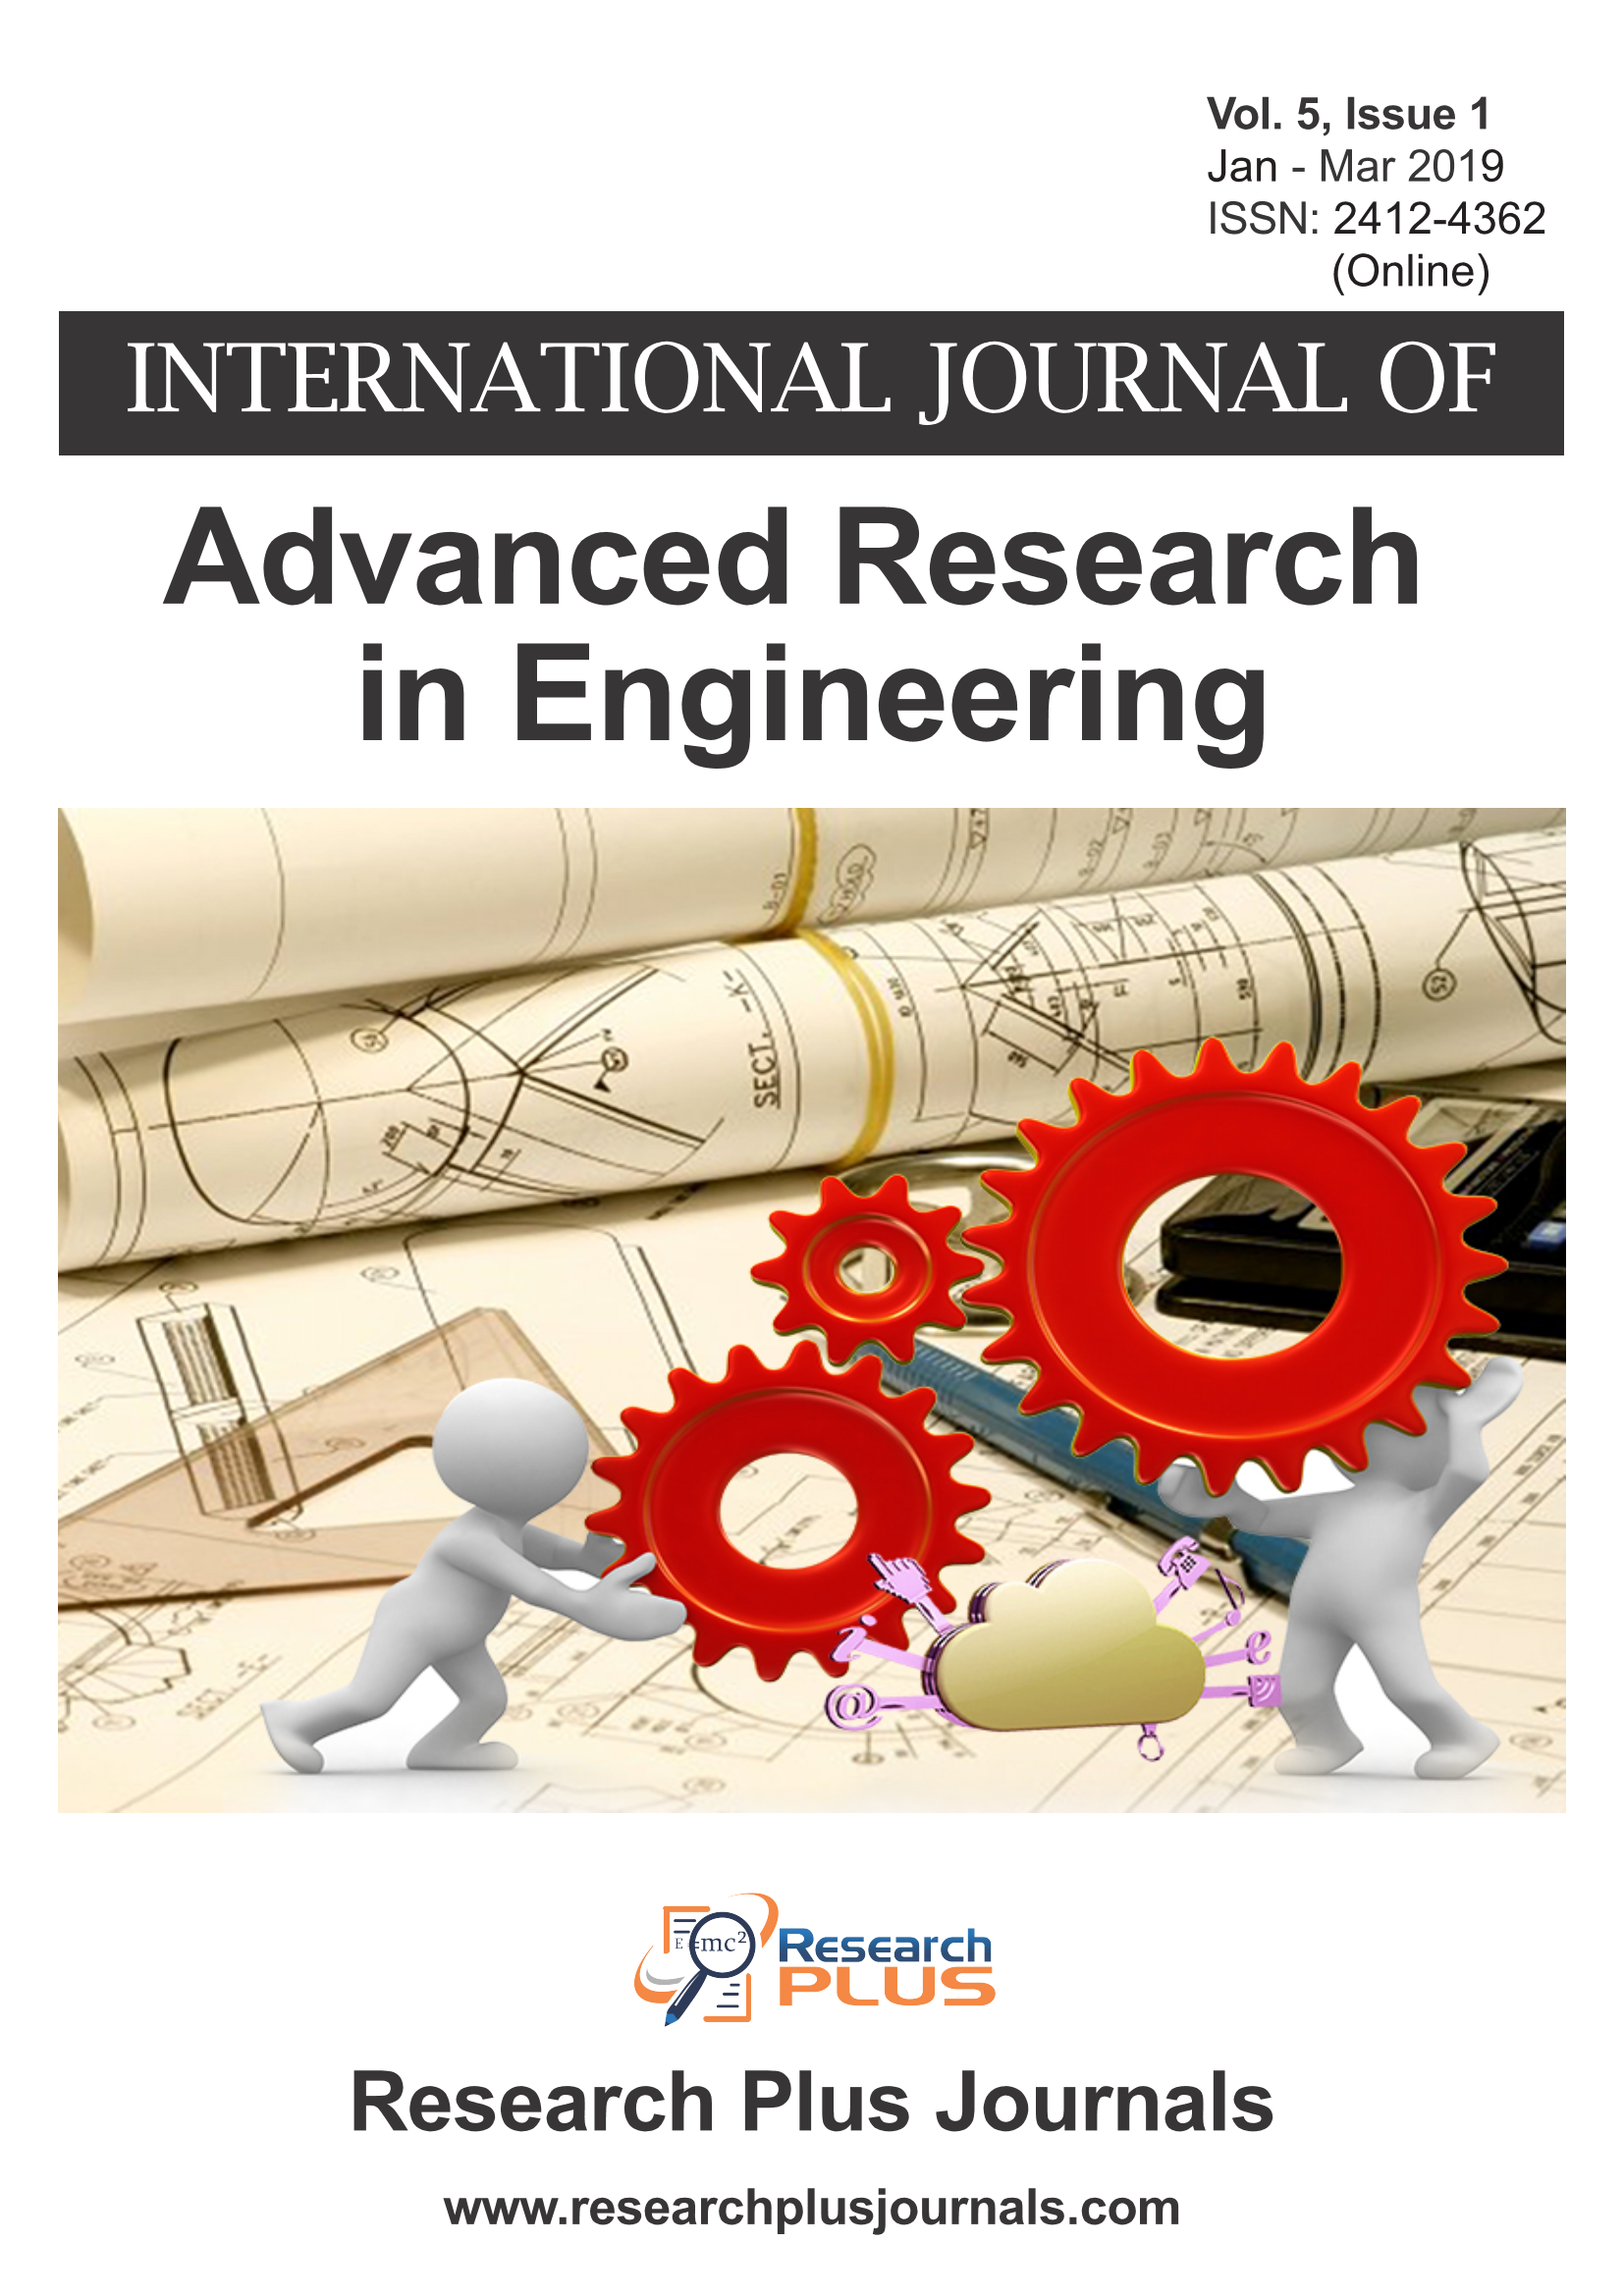 Volume 5, Issue 1, International Journal of Advanced Research in Engineering (IJARE)  (Online ISSN 2412-4362)